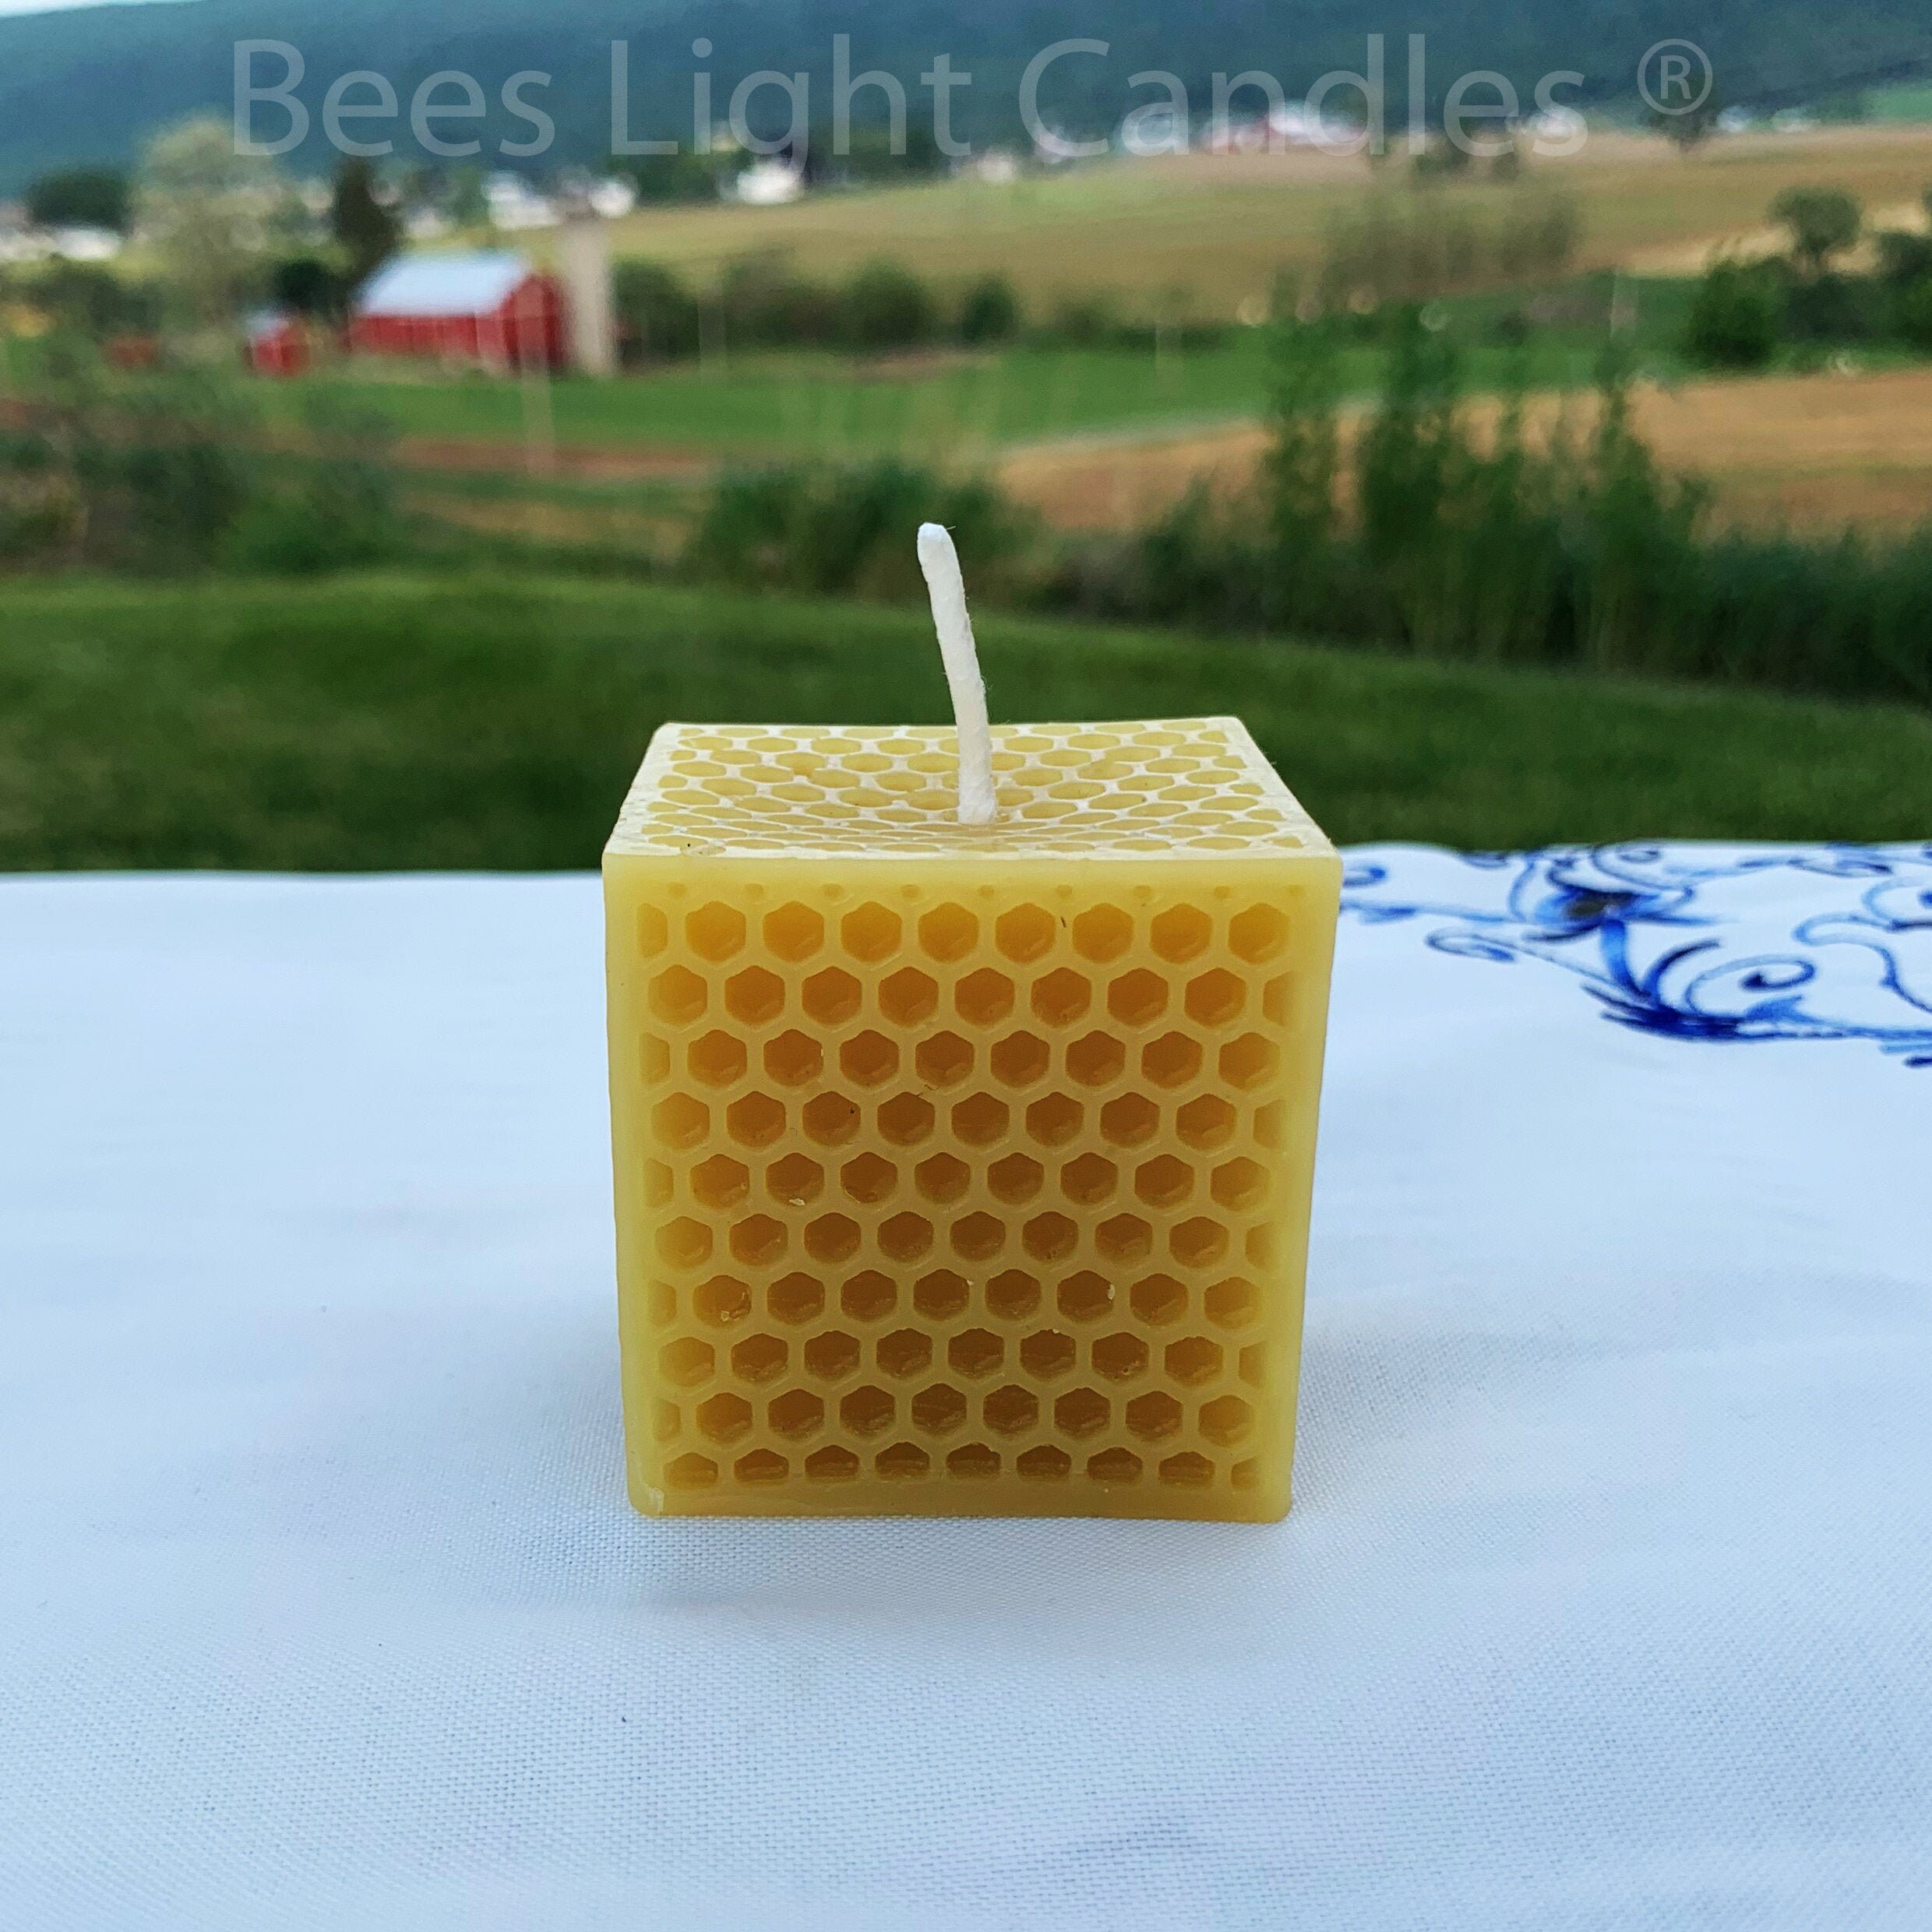  200 Tealight Beeswax Candles BULK 100% Natural Handcrafted in  USA/Aluminum Cup Tea Lights/Wedding/Event/Party/Holiday/Clean Burning  Emergency Candle/Unscented/Allergy Friendly/Natural Honey Aroma : Home &  Kitchen